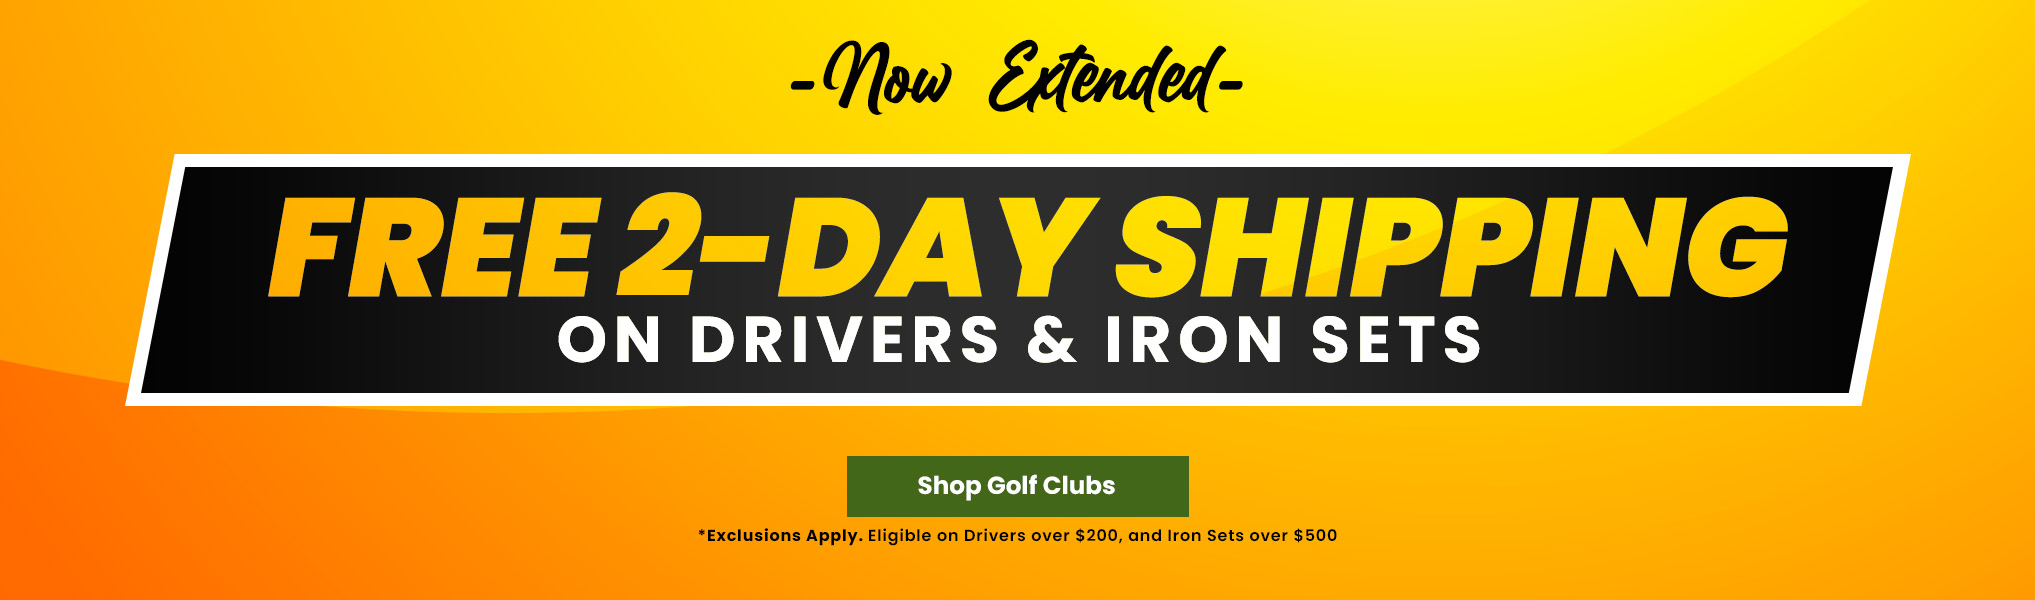 Free 2-Day Shipping on Drivers an Iron Sets